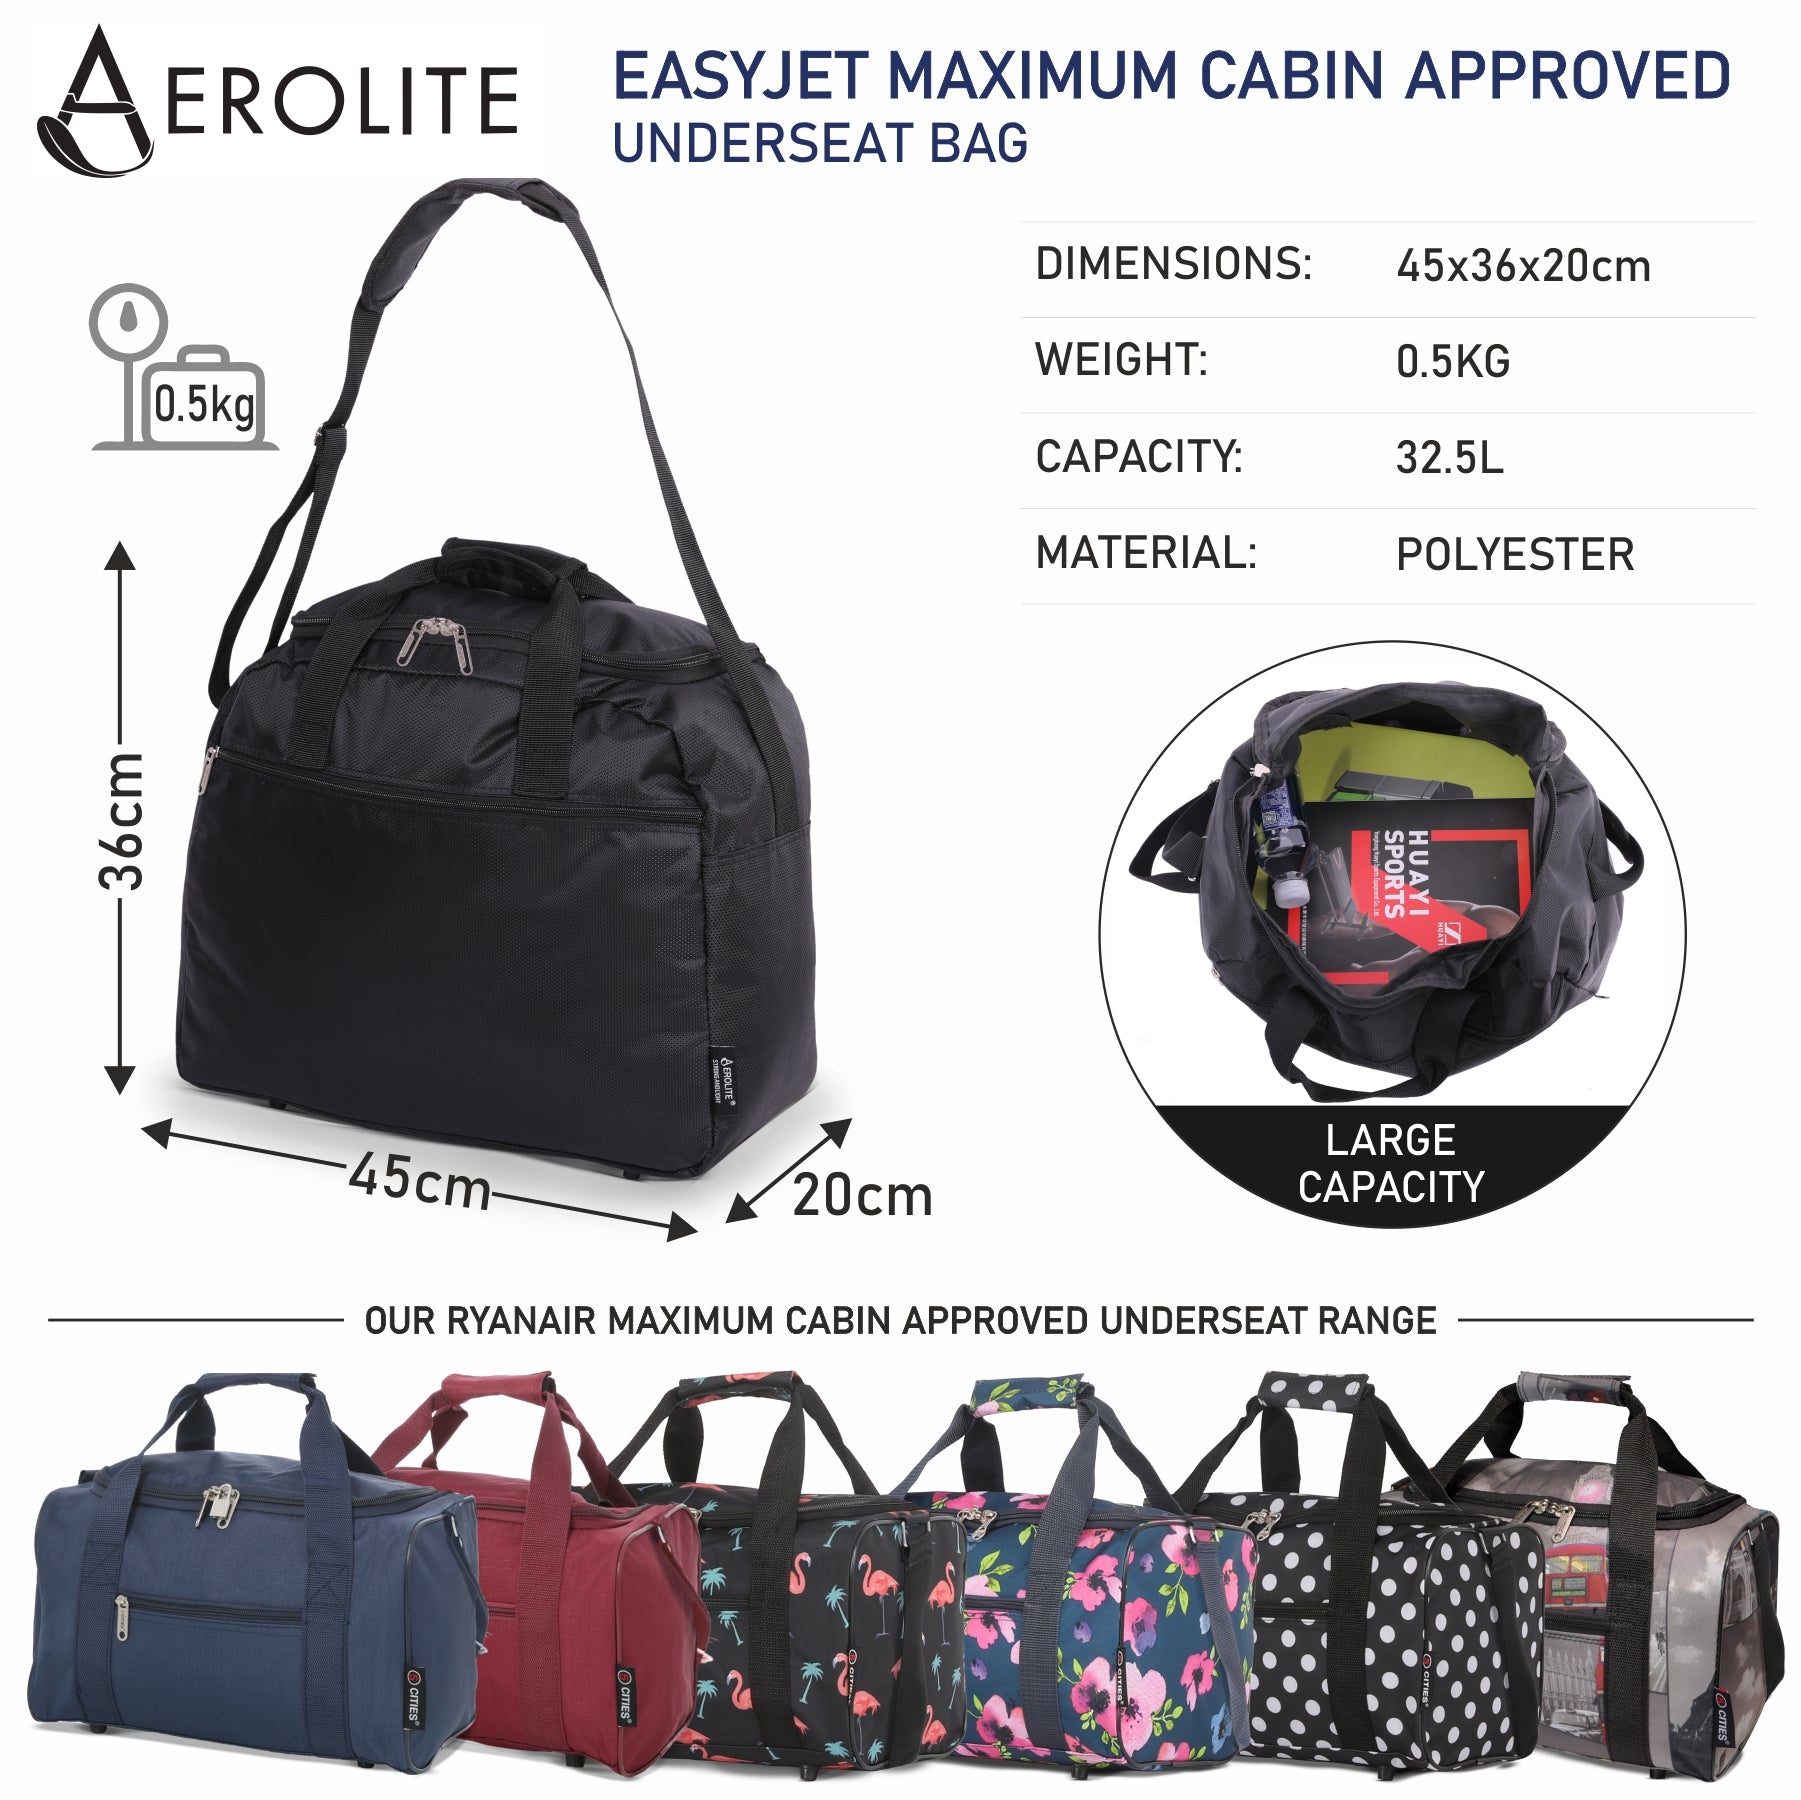 Aerolite 45x36x20 Maximum Size Carry On Holdall Travel Duffel Bag Cabin  Luggage Lightweight with 5 Yr Warranty - Sold By Packed Direct FBA